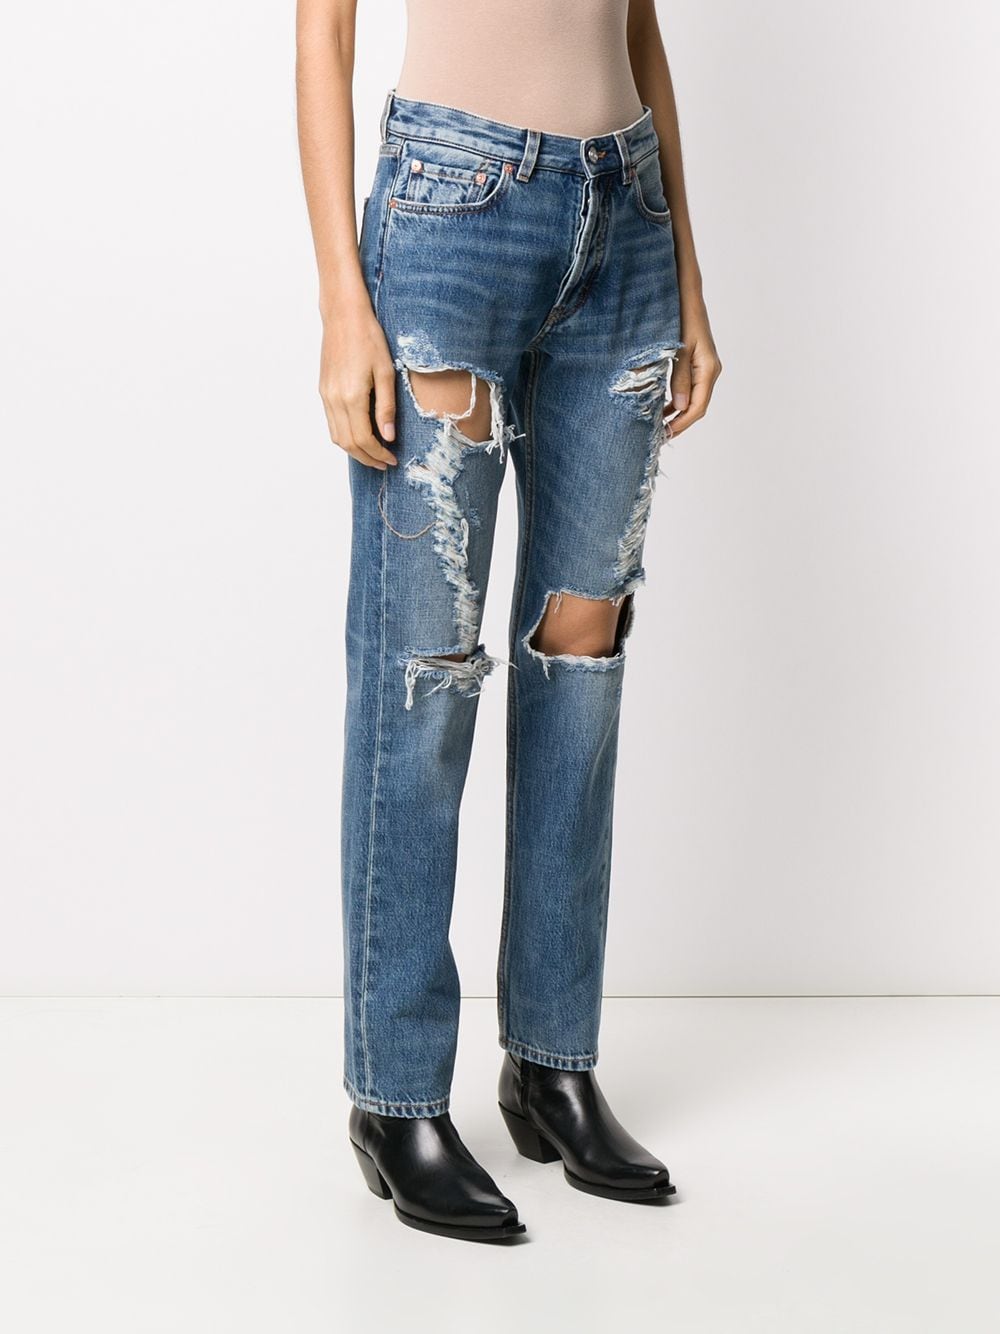 Givenchy Ripped Distressed Jeans - Farfetch